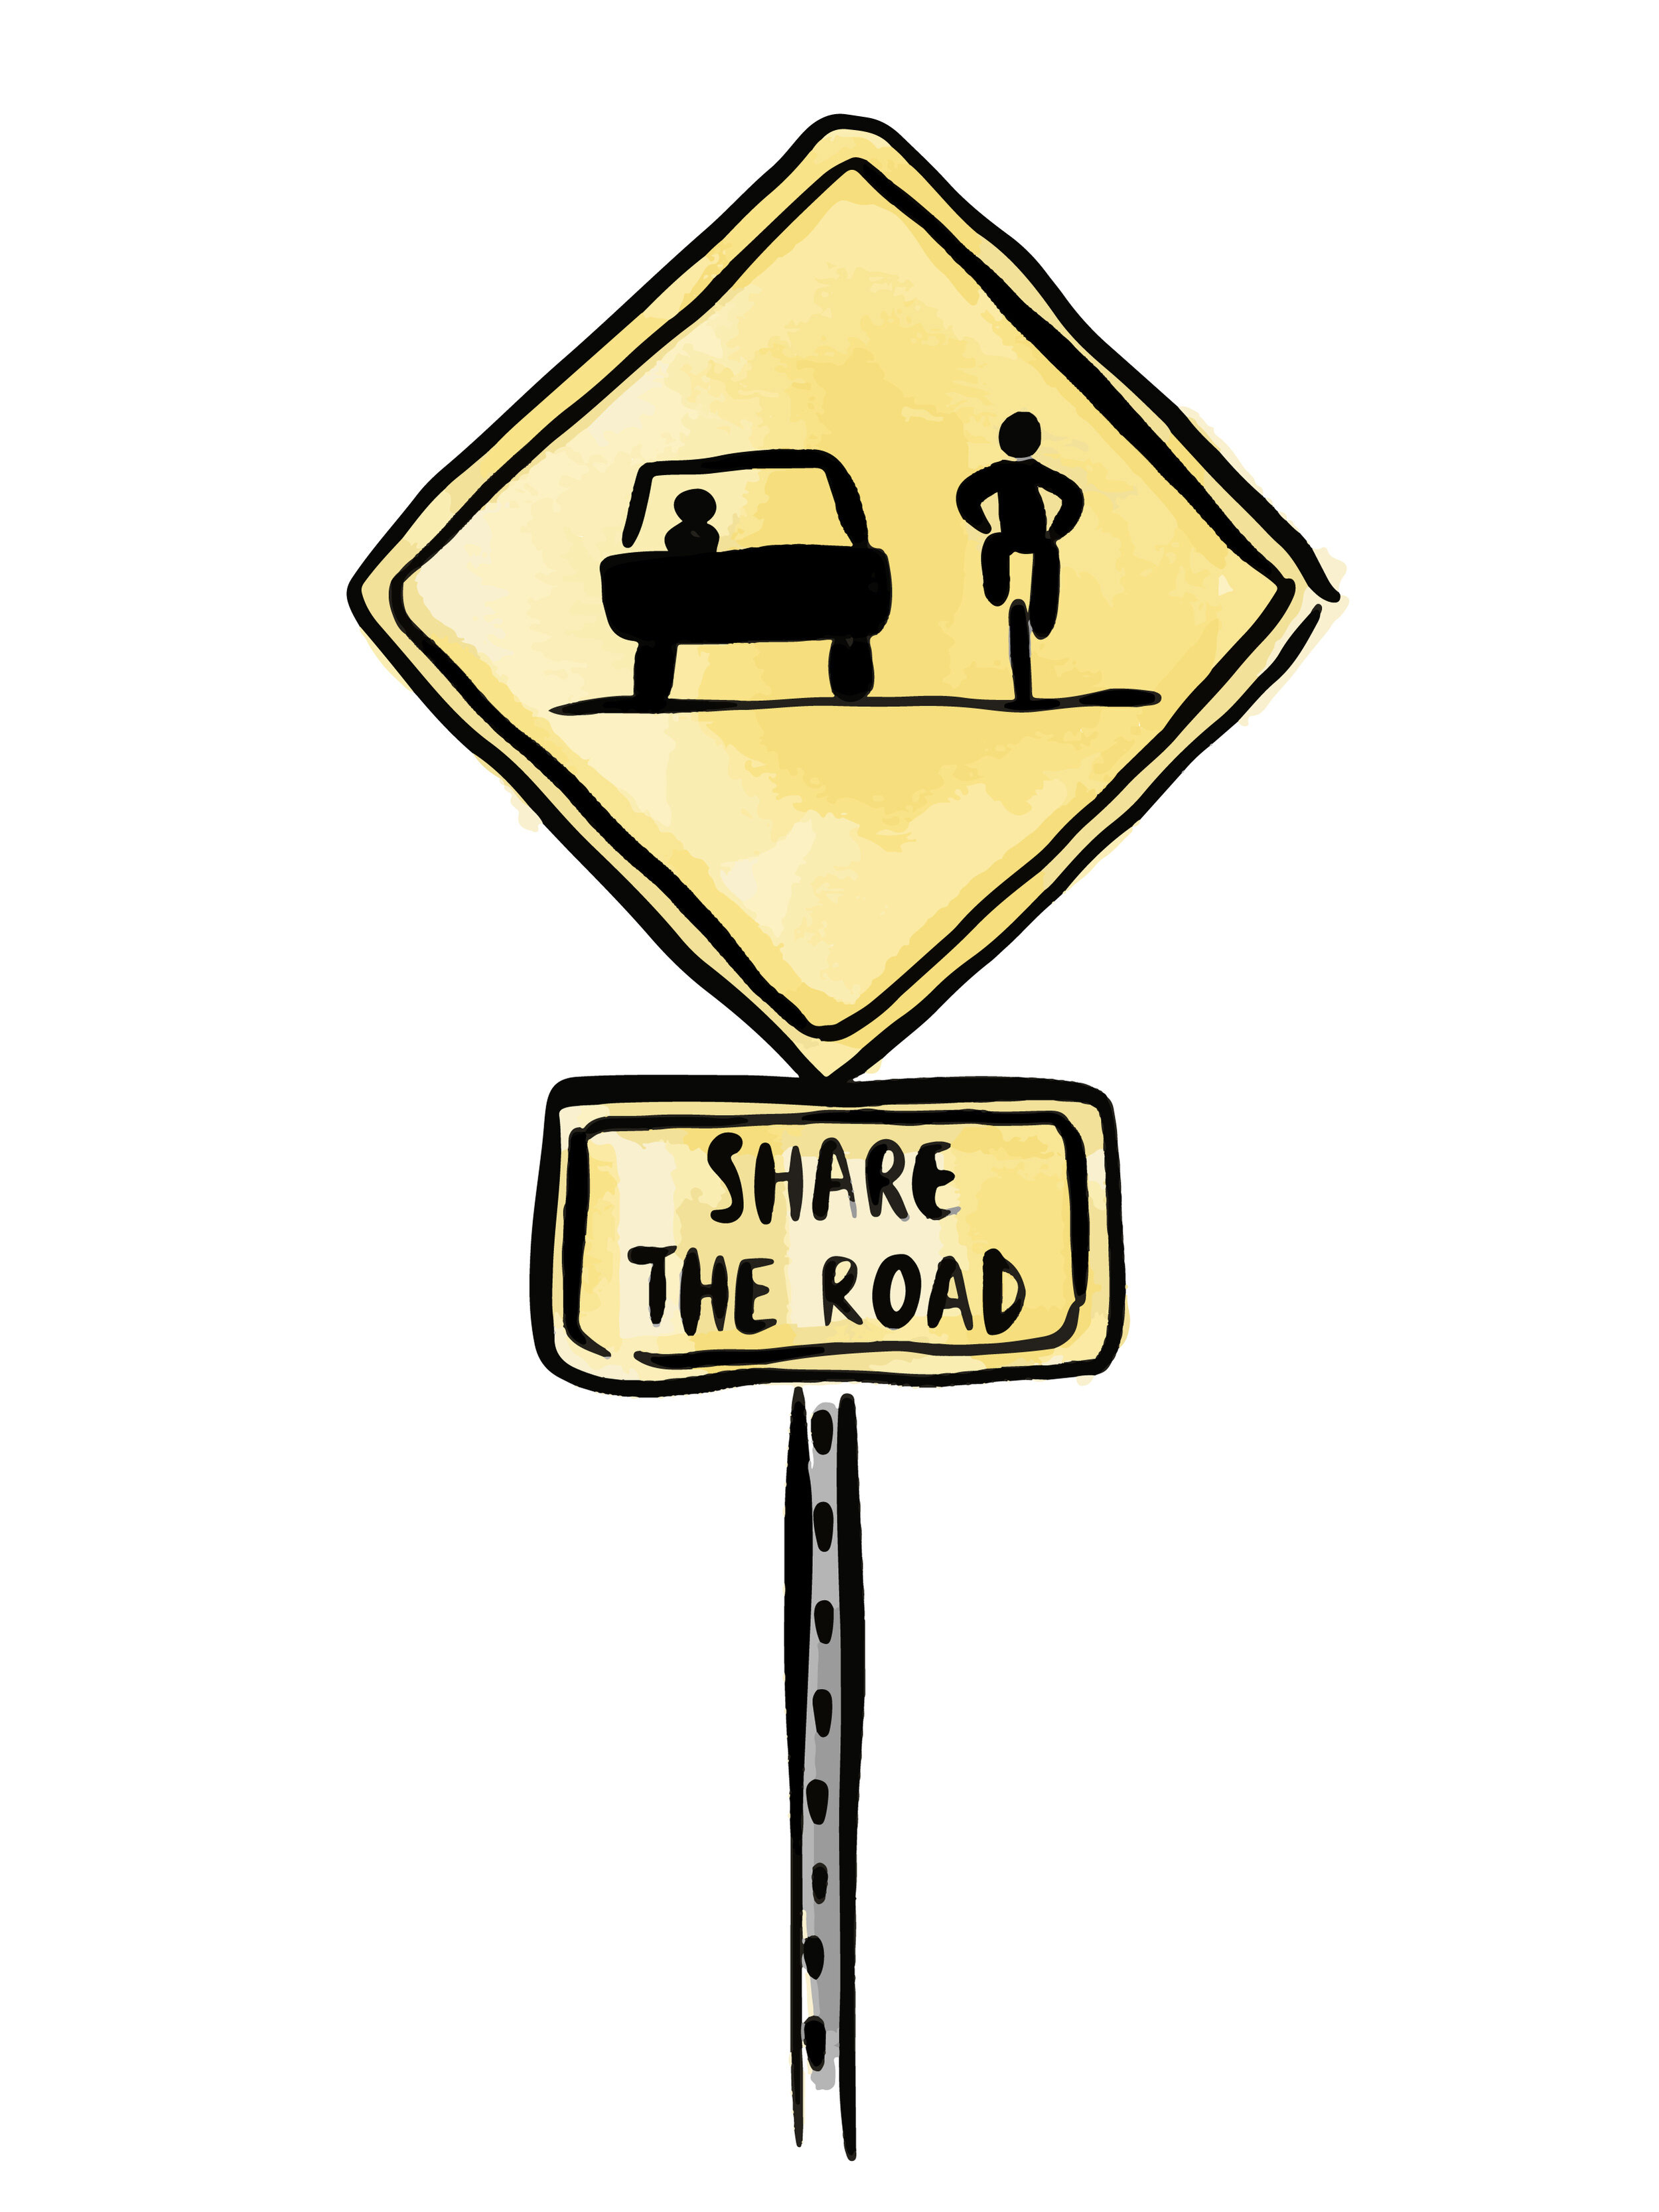 Share the Road@300x-80.jpg